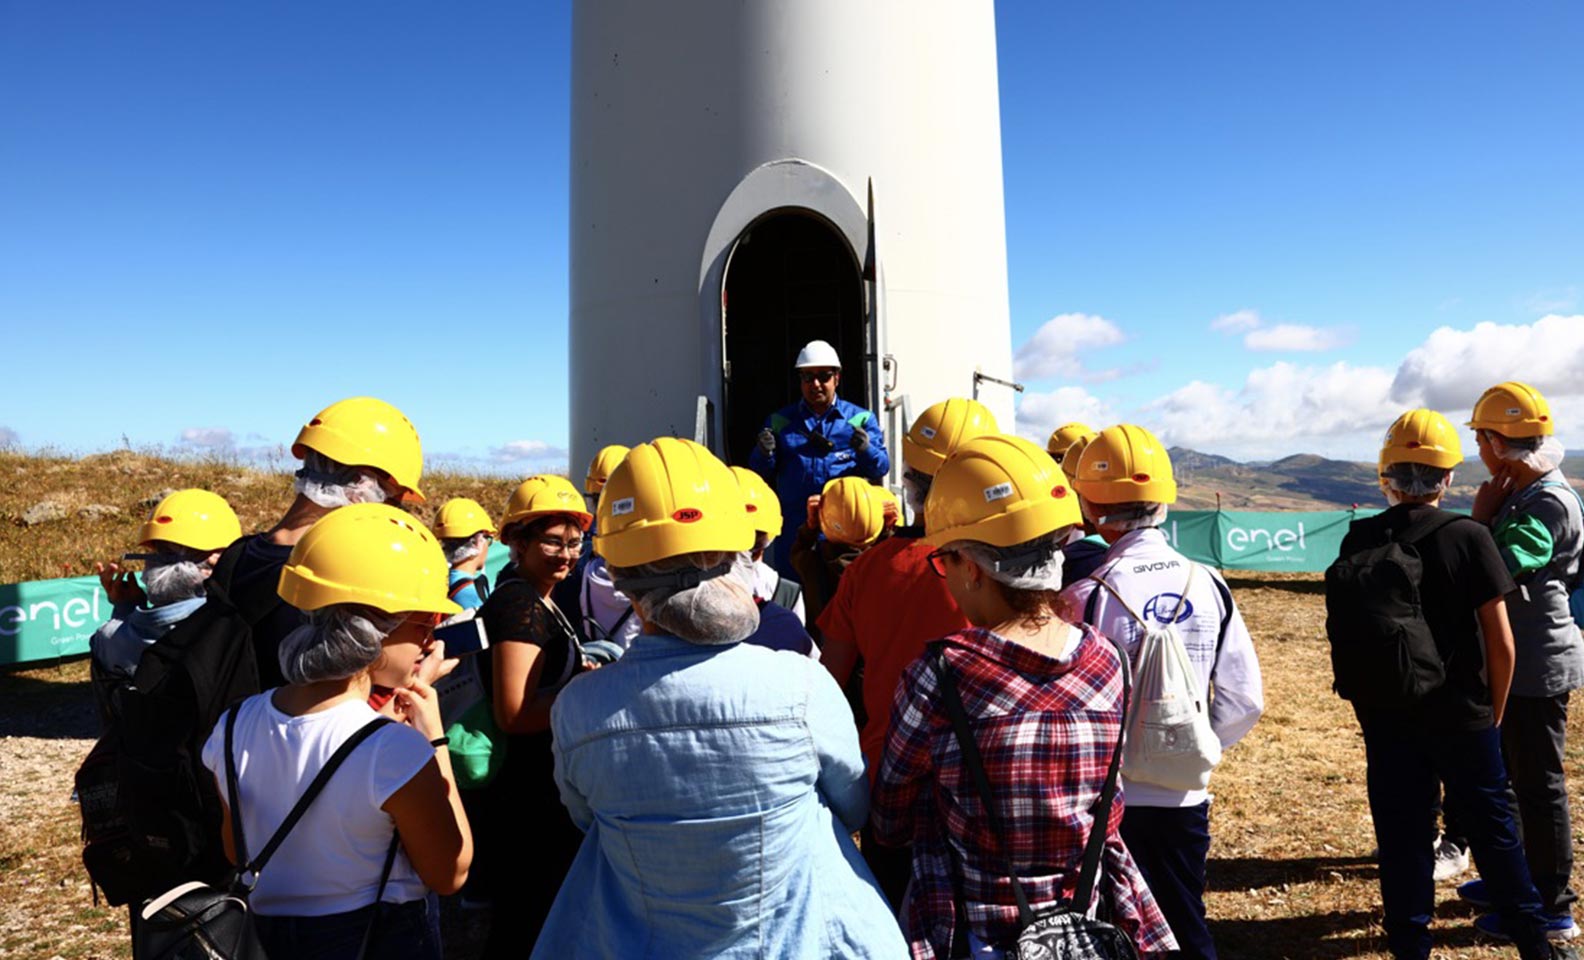 Men and women with yellow helmets in front of a wind turbine